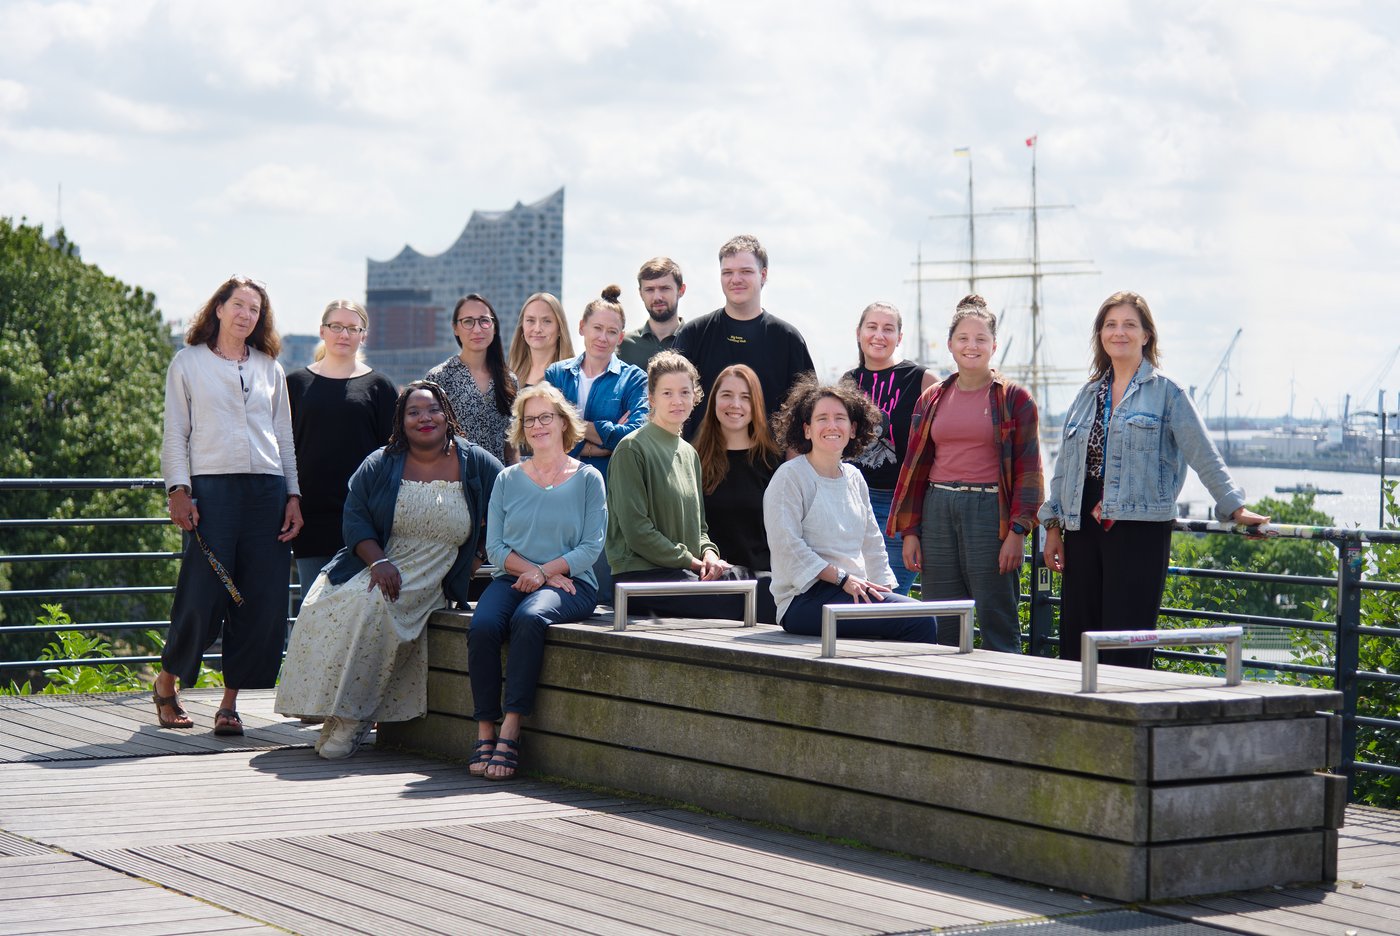 The picture shows a team of 15 sitting on a bench or standing behind it on a sunny day. In the background you can see the building of the Hamburg Elbphilharmonie.